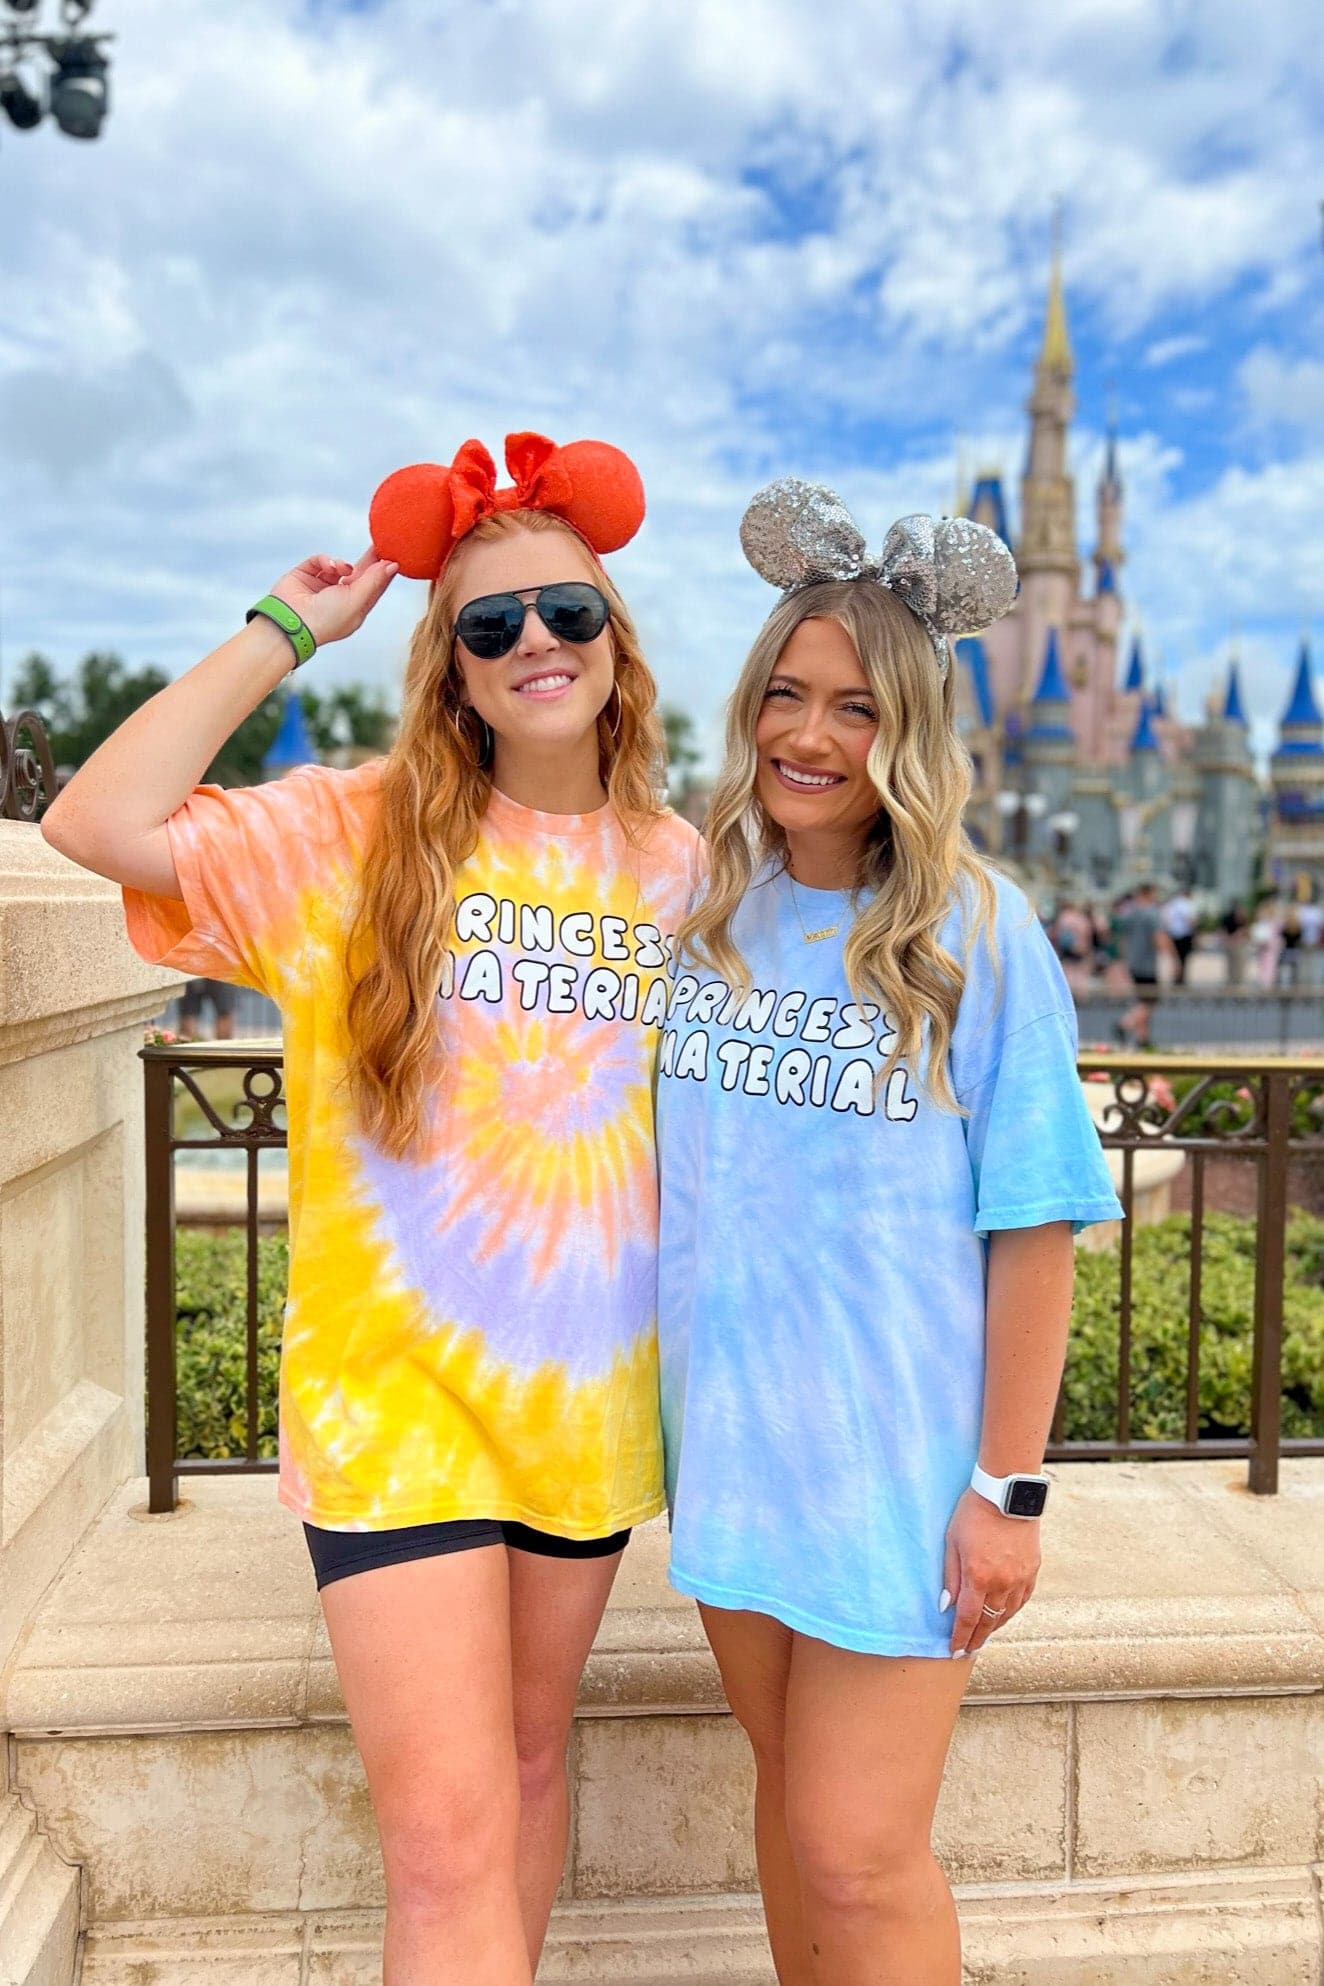  Princess Material Retro Graphic Tee - Madison and Mallory